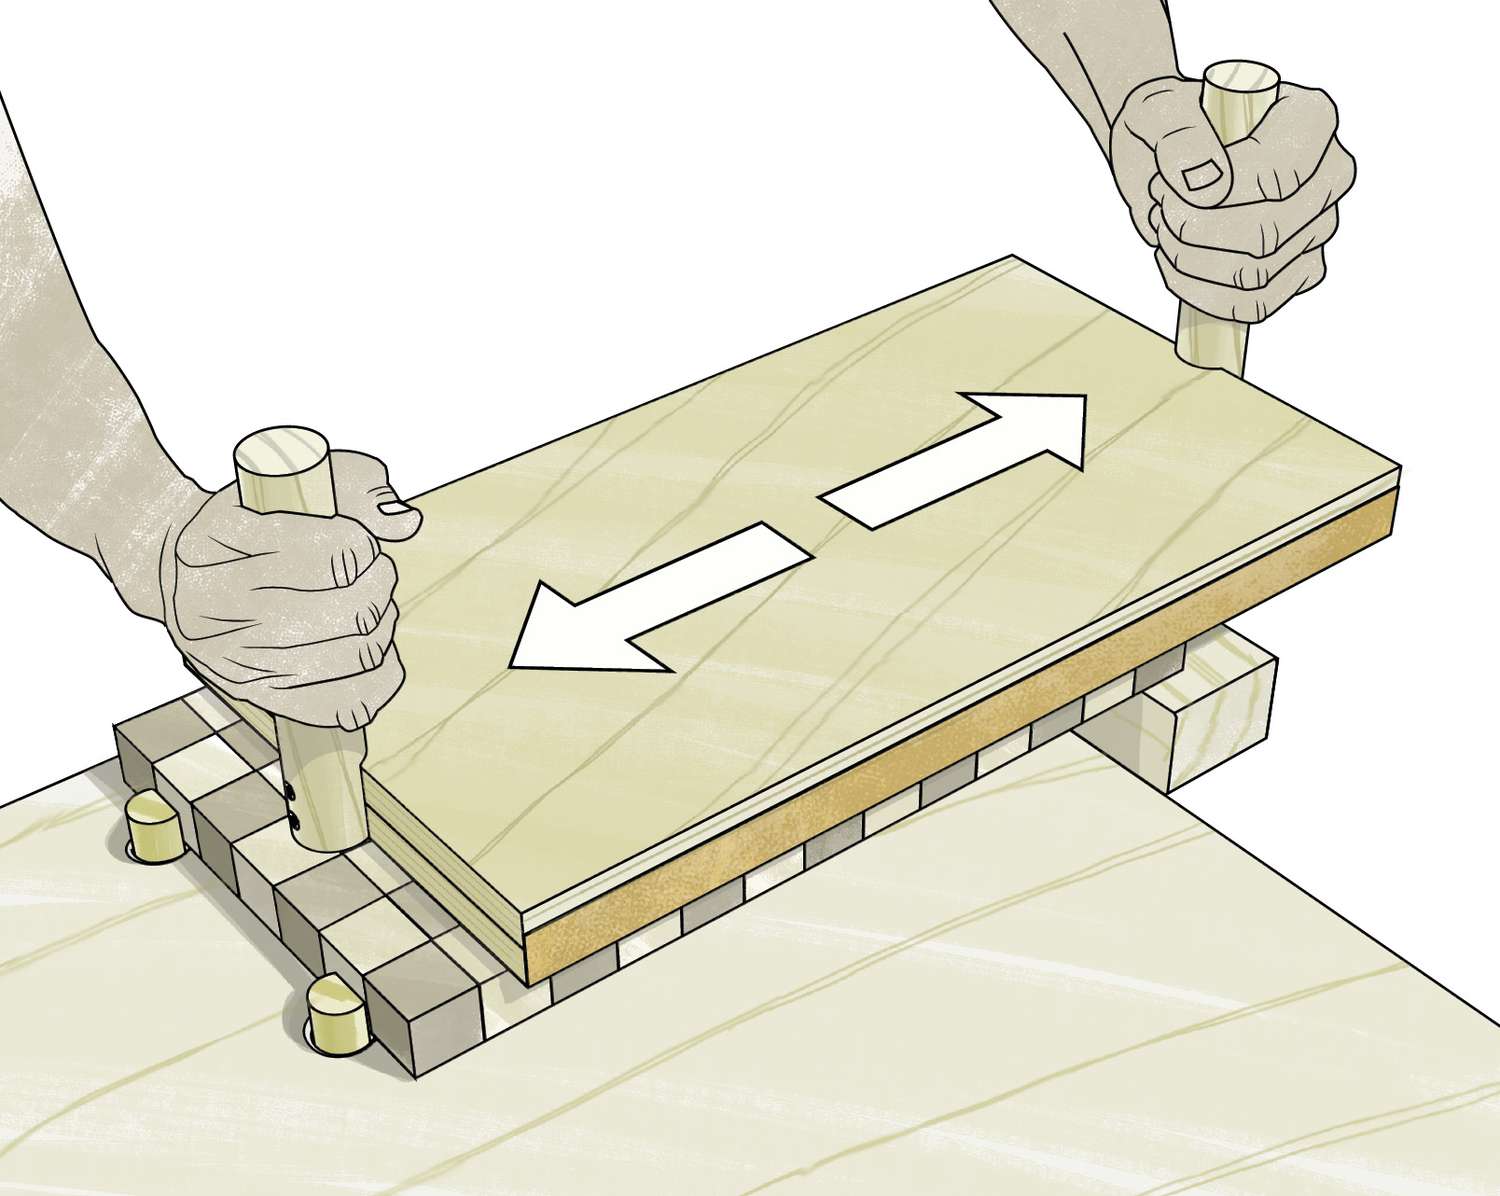 Drawing of two fisted sanding block on cutting boards